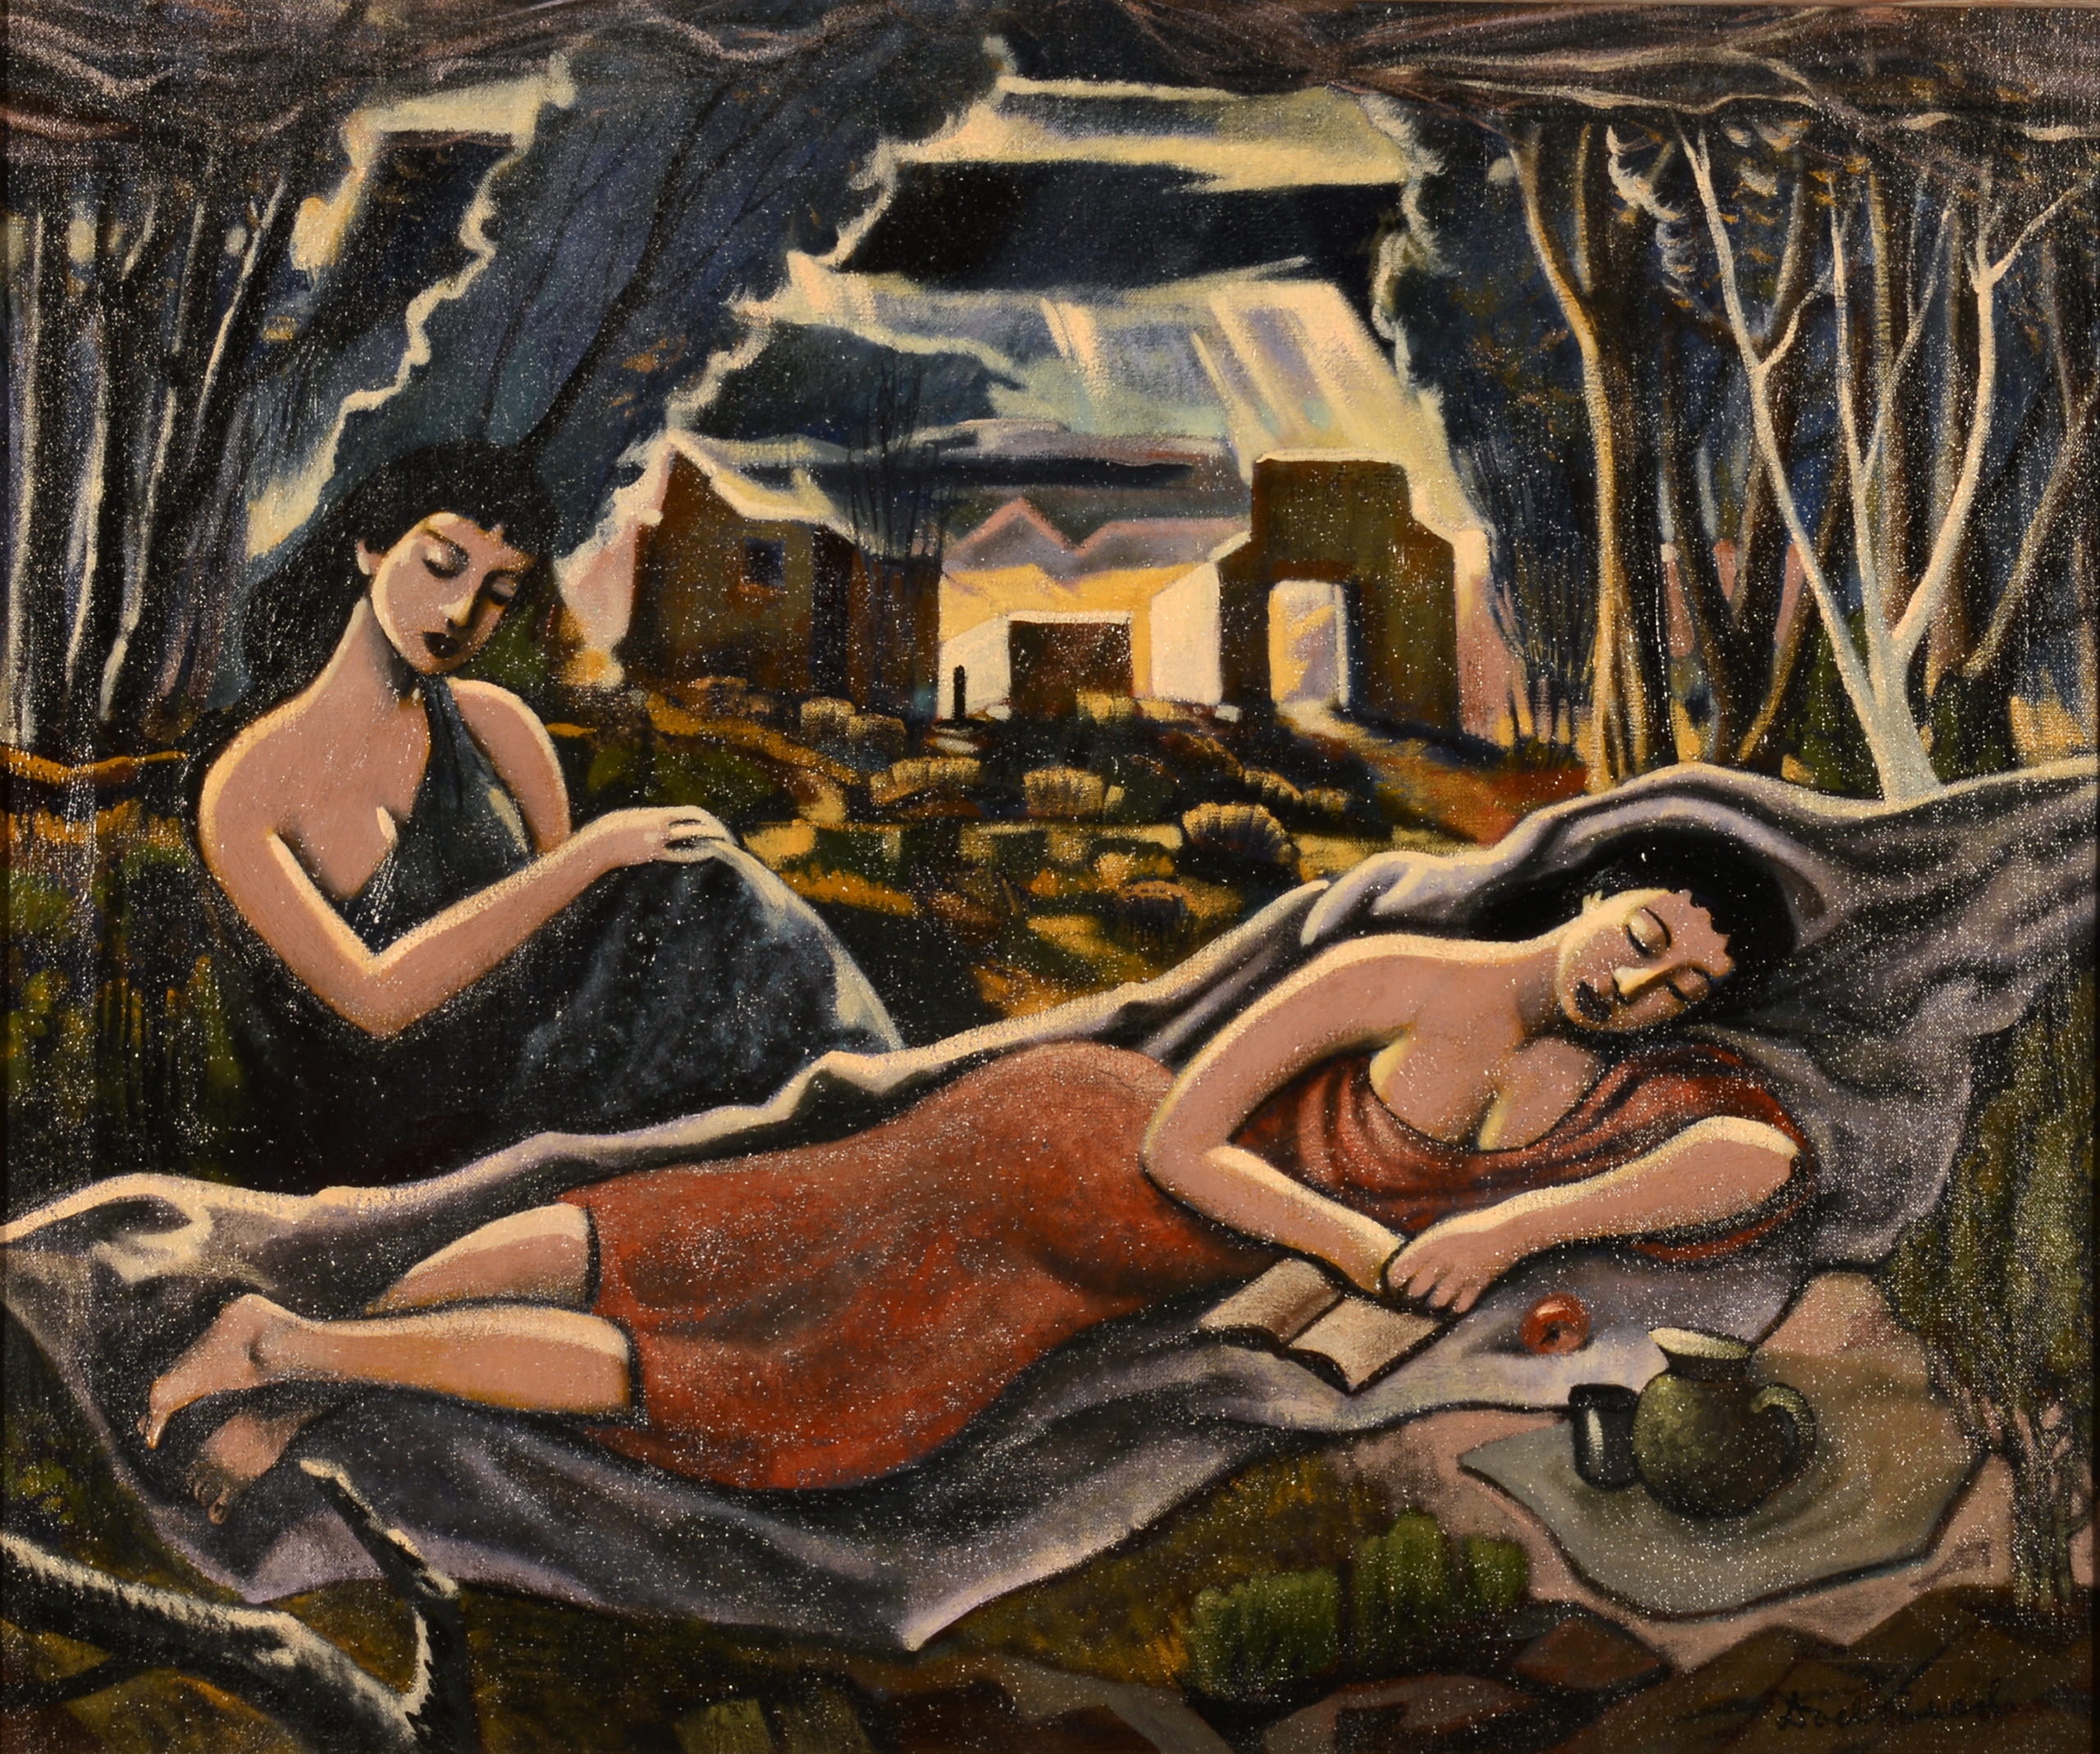 
		                					Doel Reed		                																	
																											<i>Evening Rest,</i>  
																																								c. 1940s, 
																																								oil on canvas, 
																																								25 x 30 inches 
																								
		                				